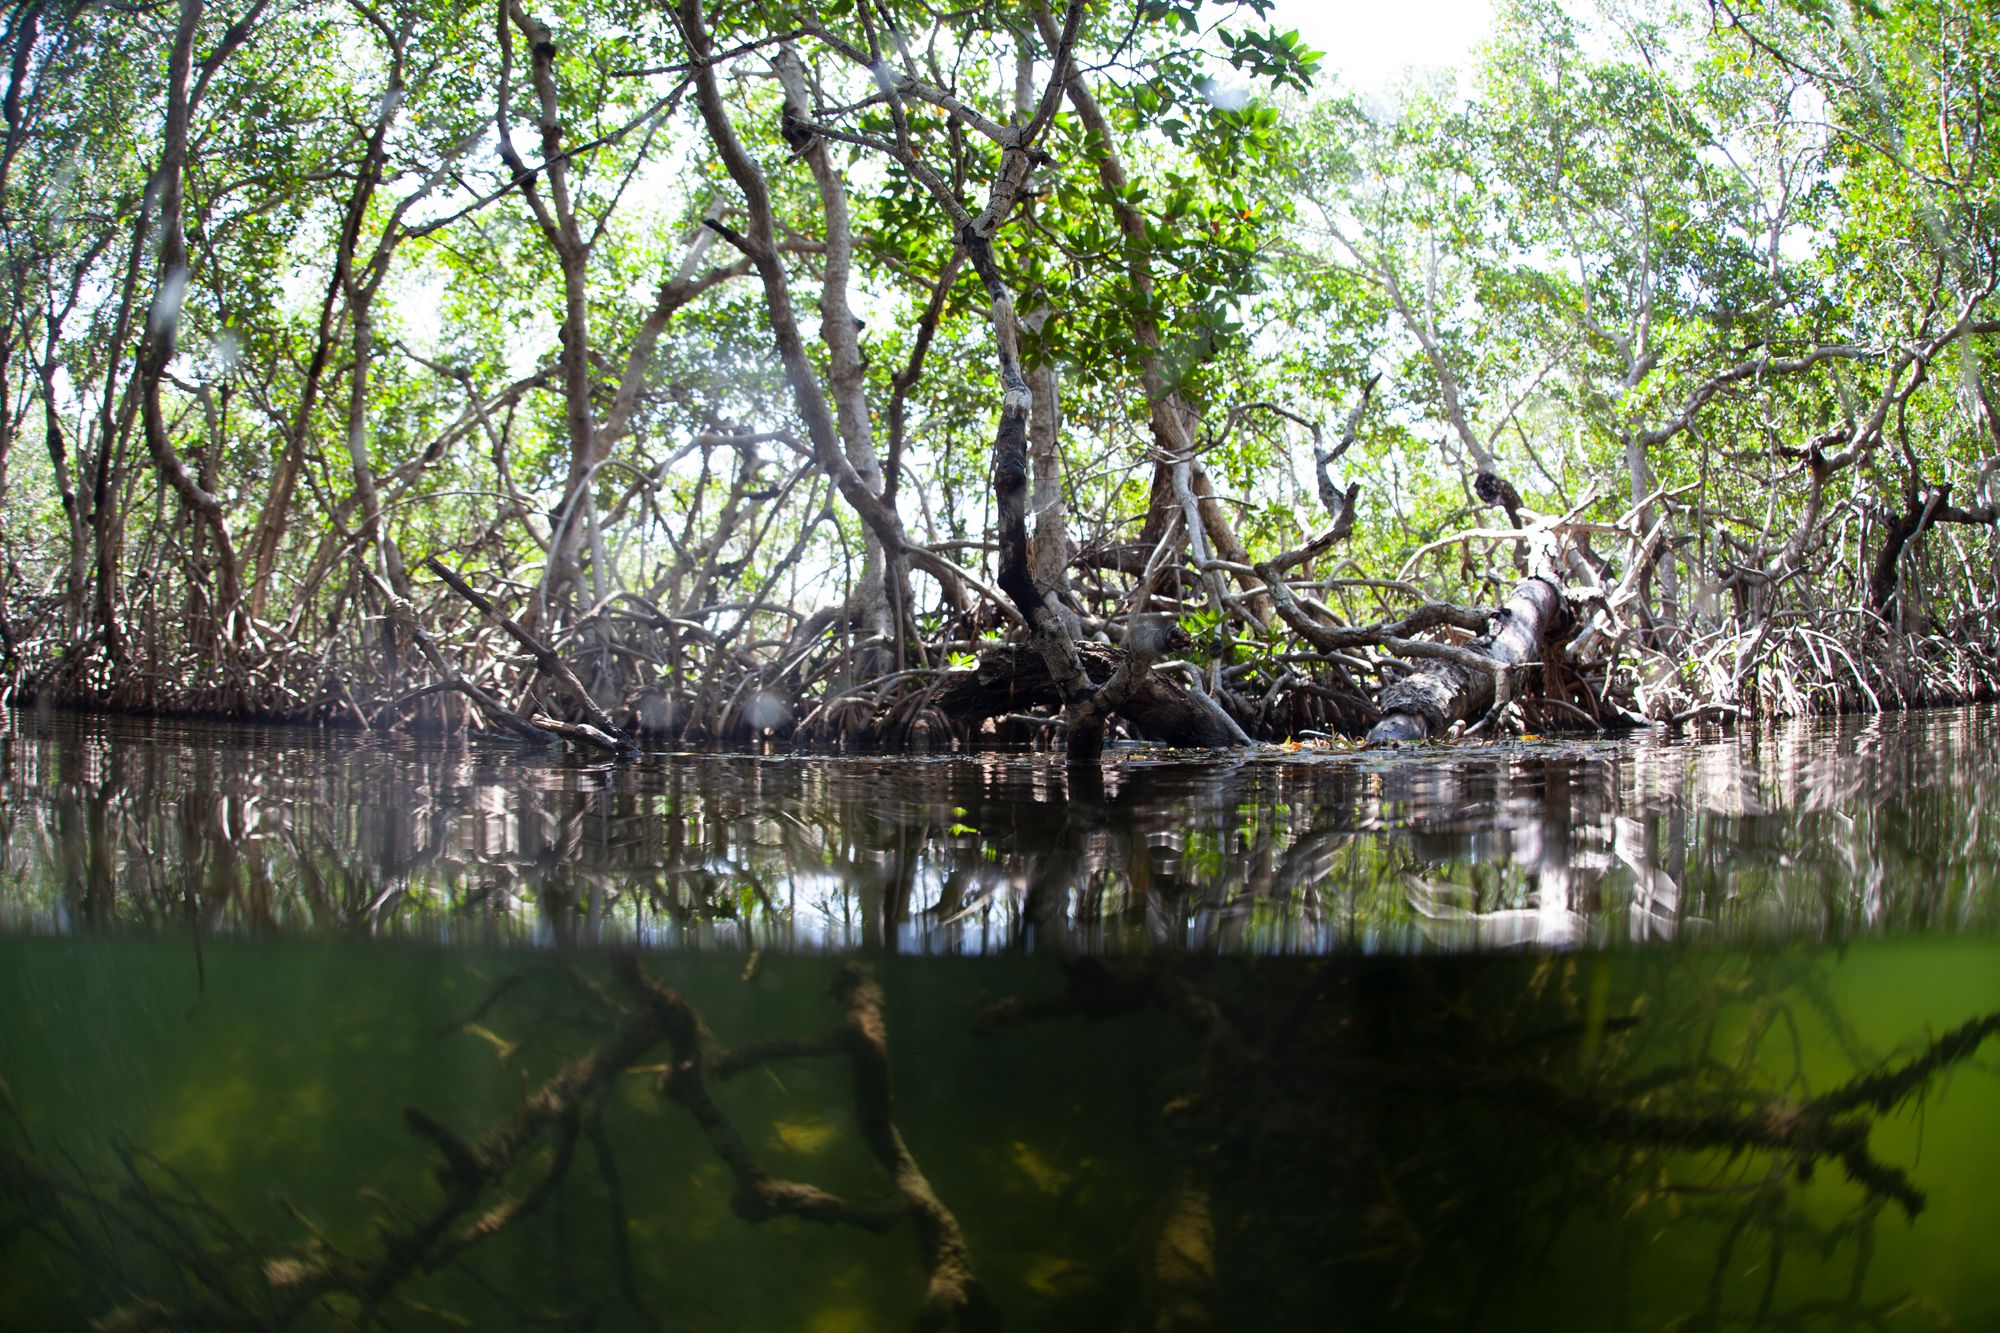 FKNMS Mangroves by National Marine Sanctuaries